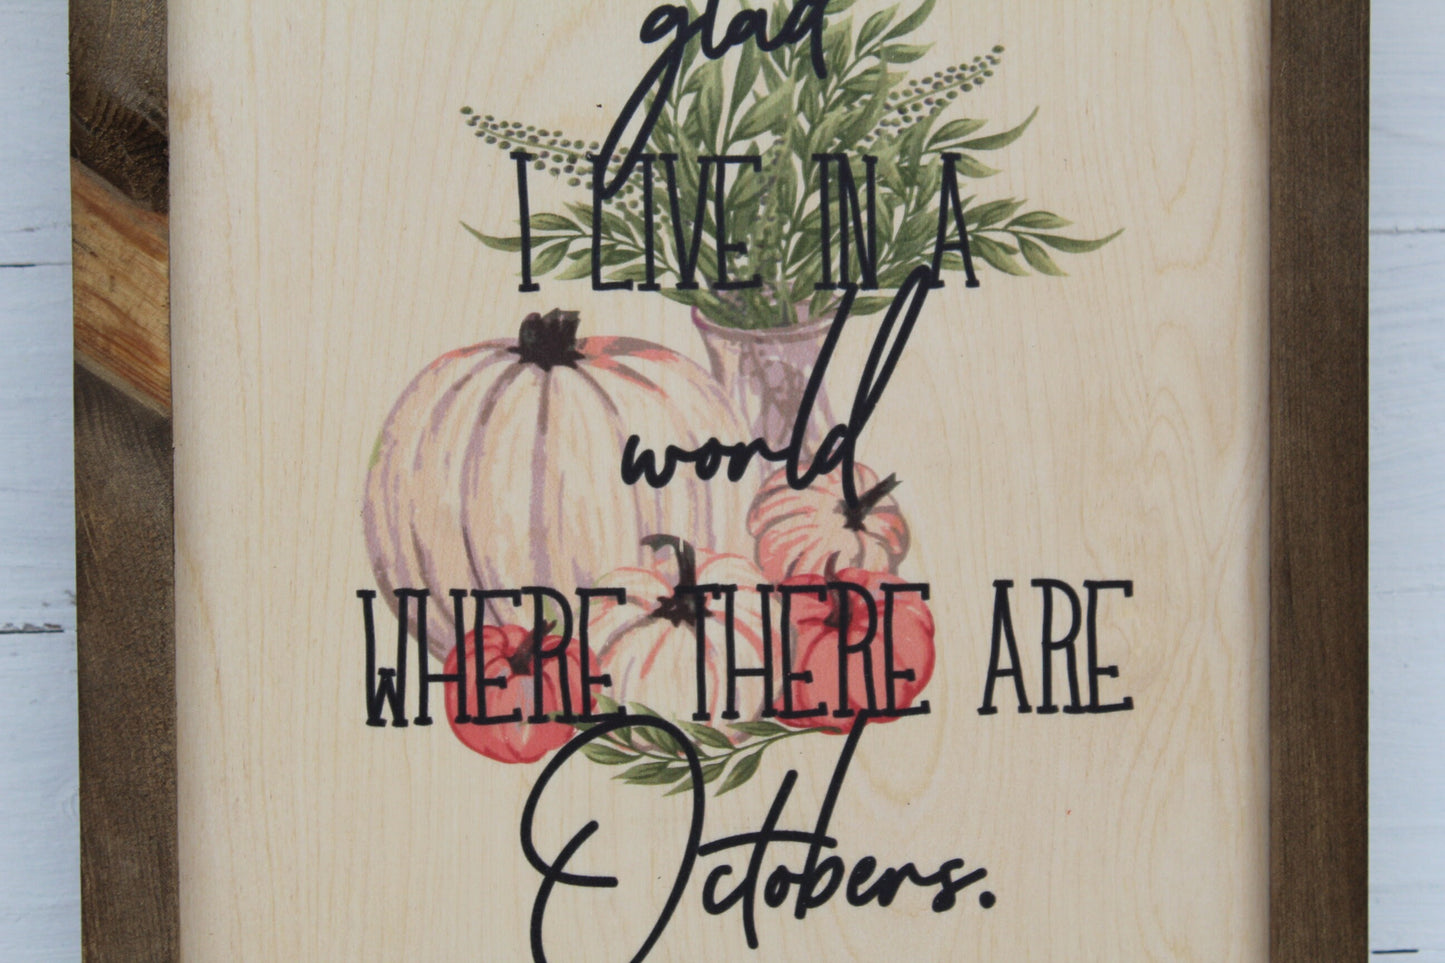 I'm So Glad I Live In A World Where There Are Octobers Rustic Wood Sign Framed Print Decor Farmhouse Primitive Fall Pumpkins Wall Décor